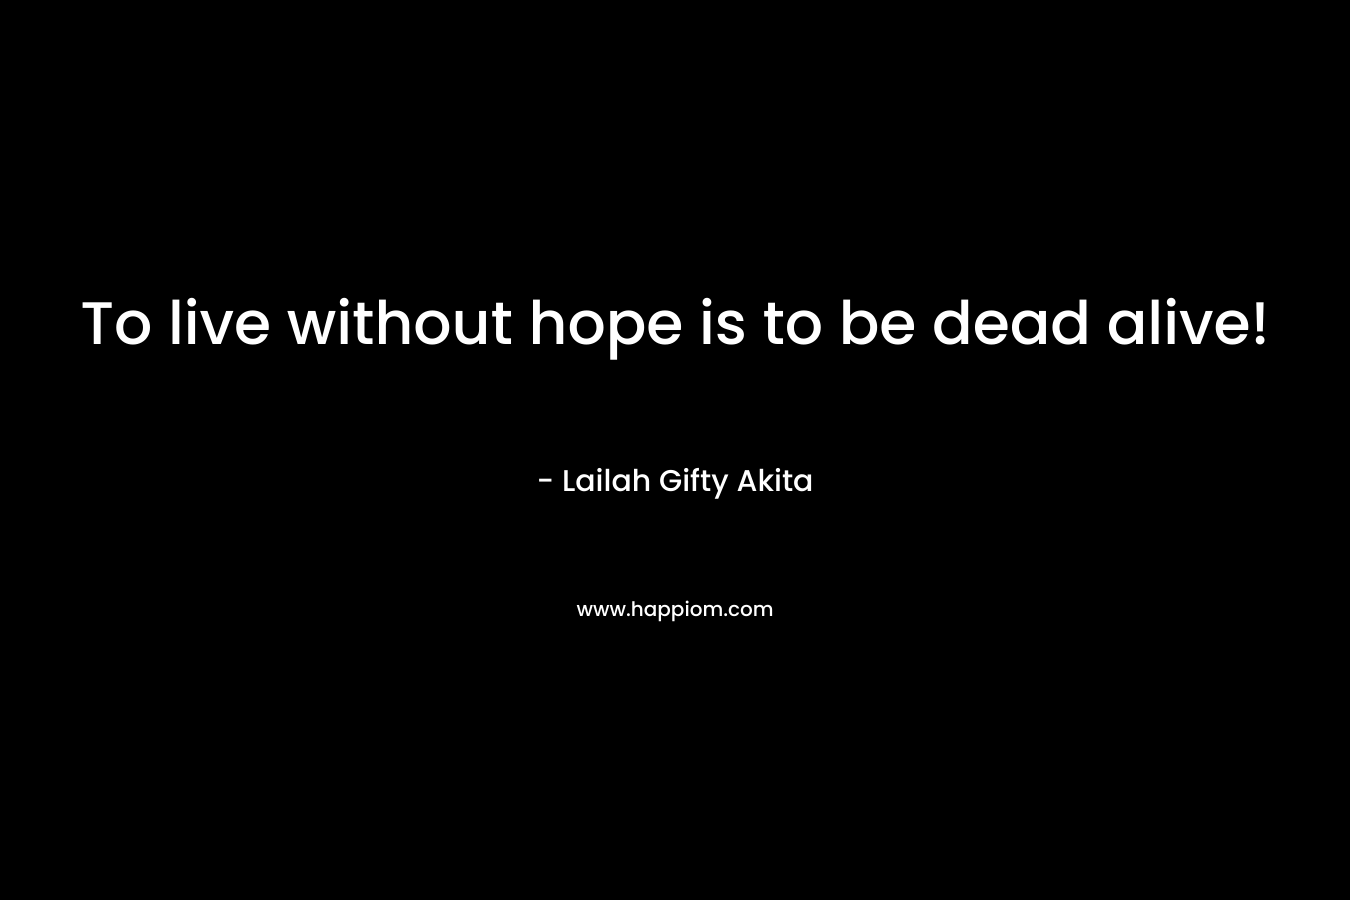 To live without hope is to be dead alive!